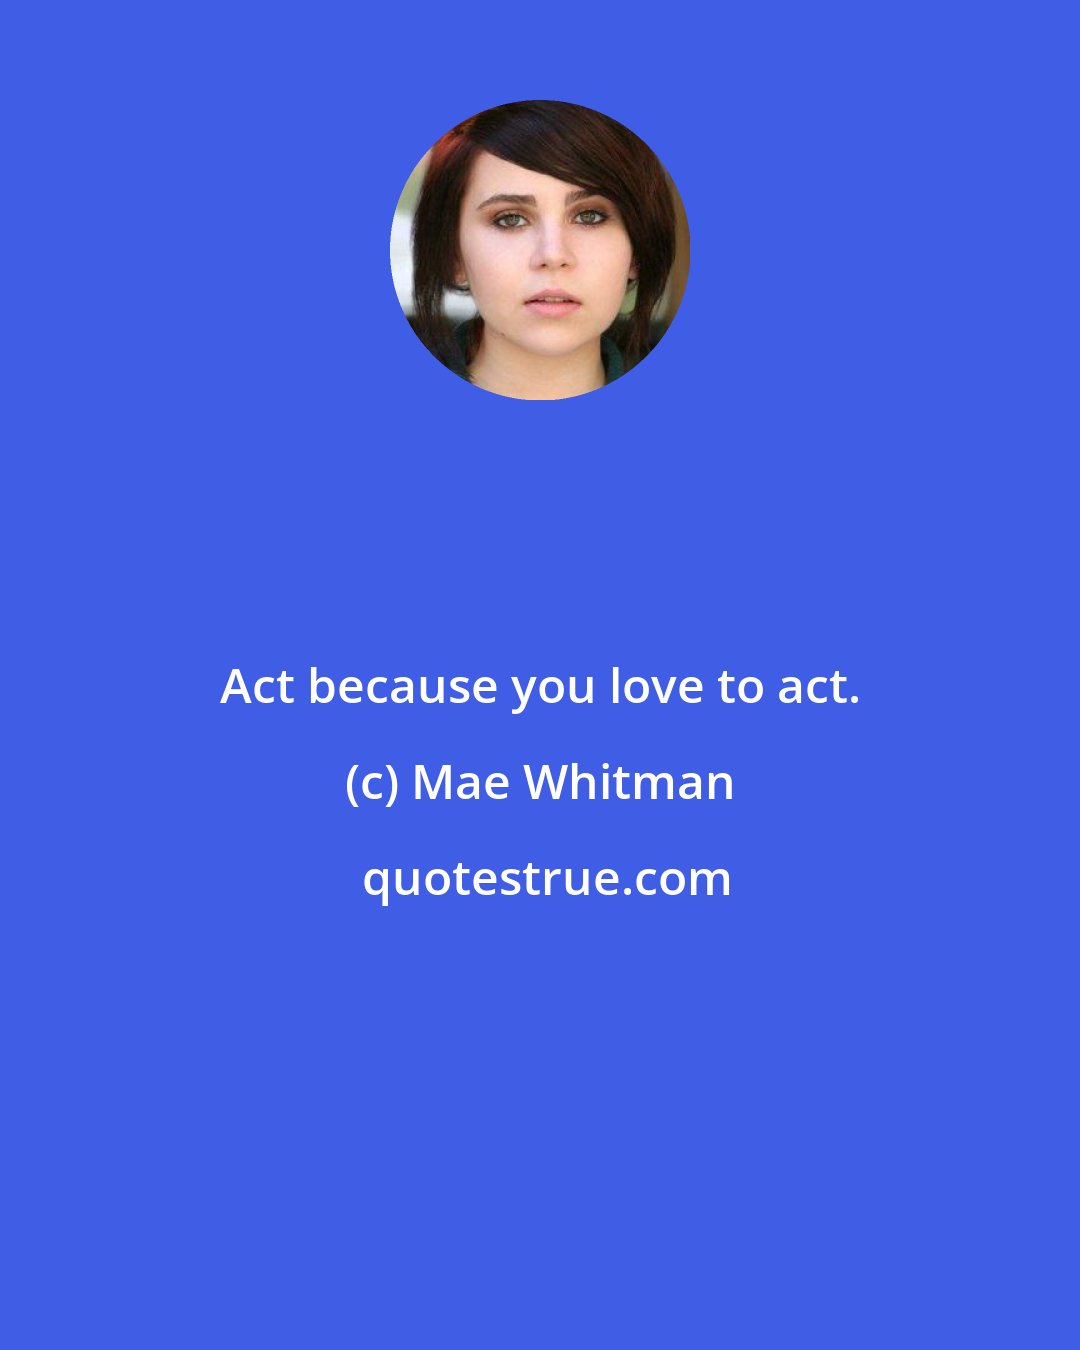 Mae Whitman: Act because you love to act.